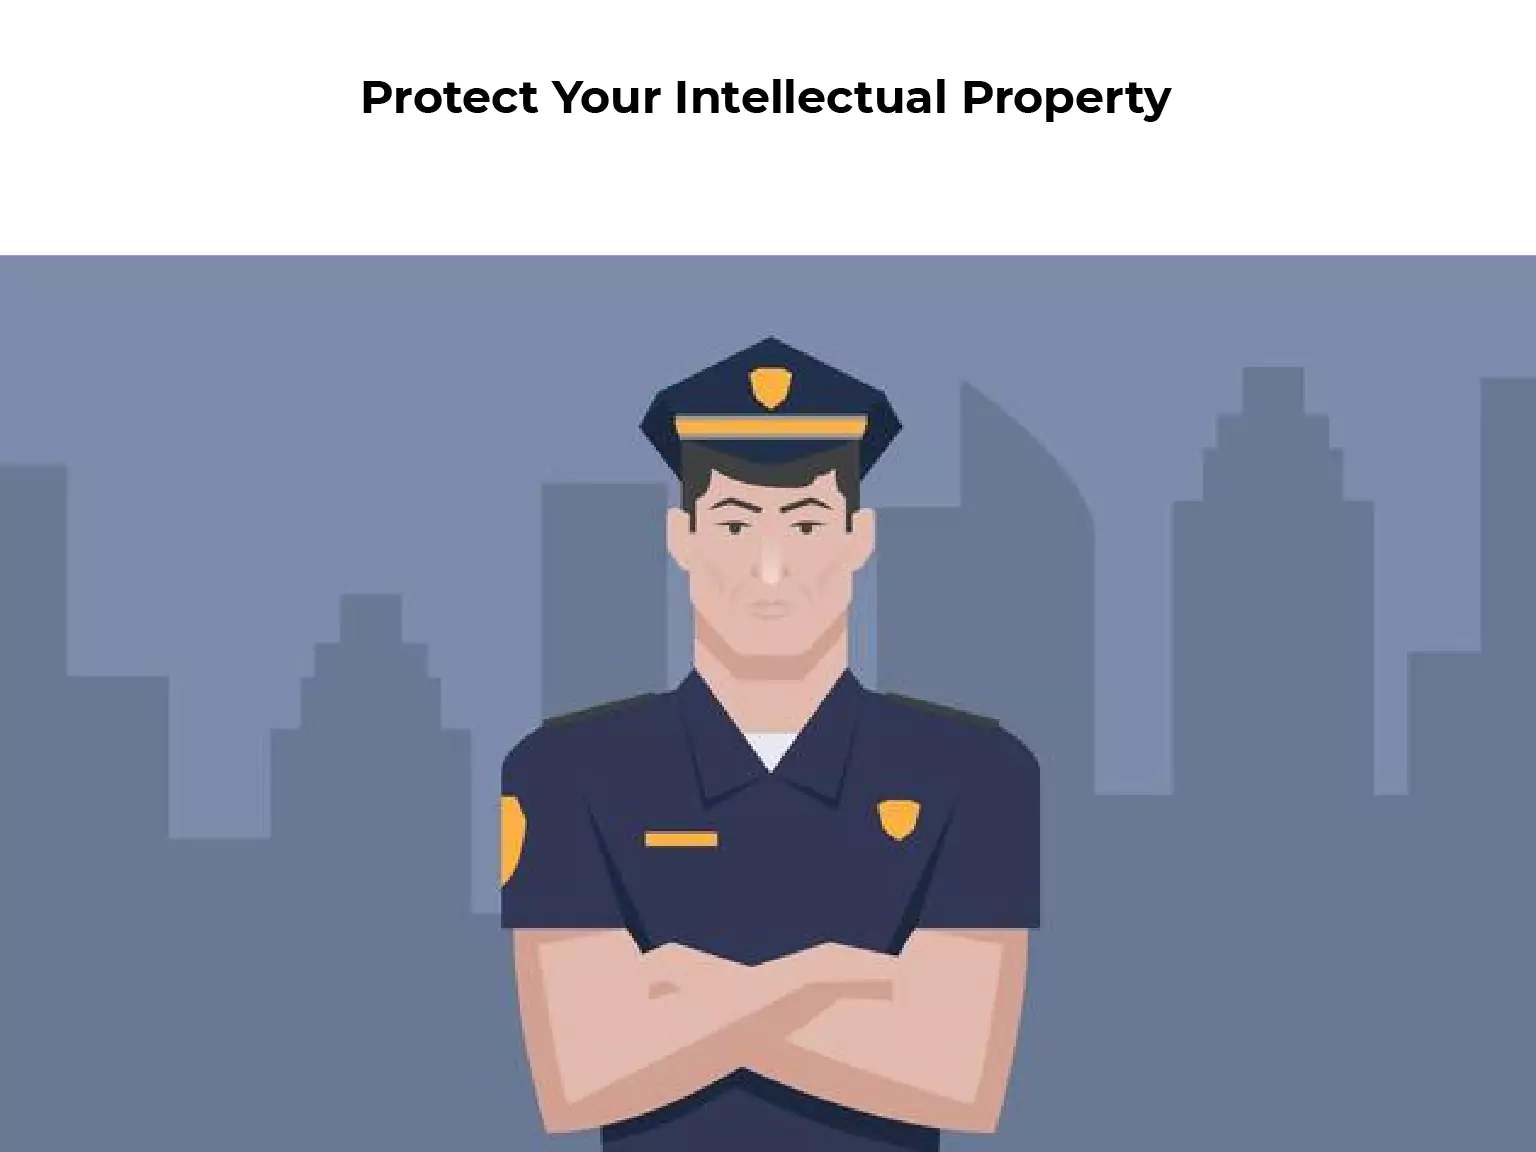 Protect Your Intellectual Property